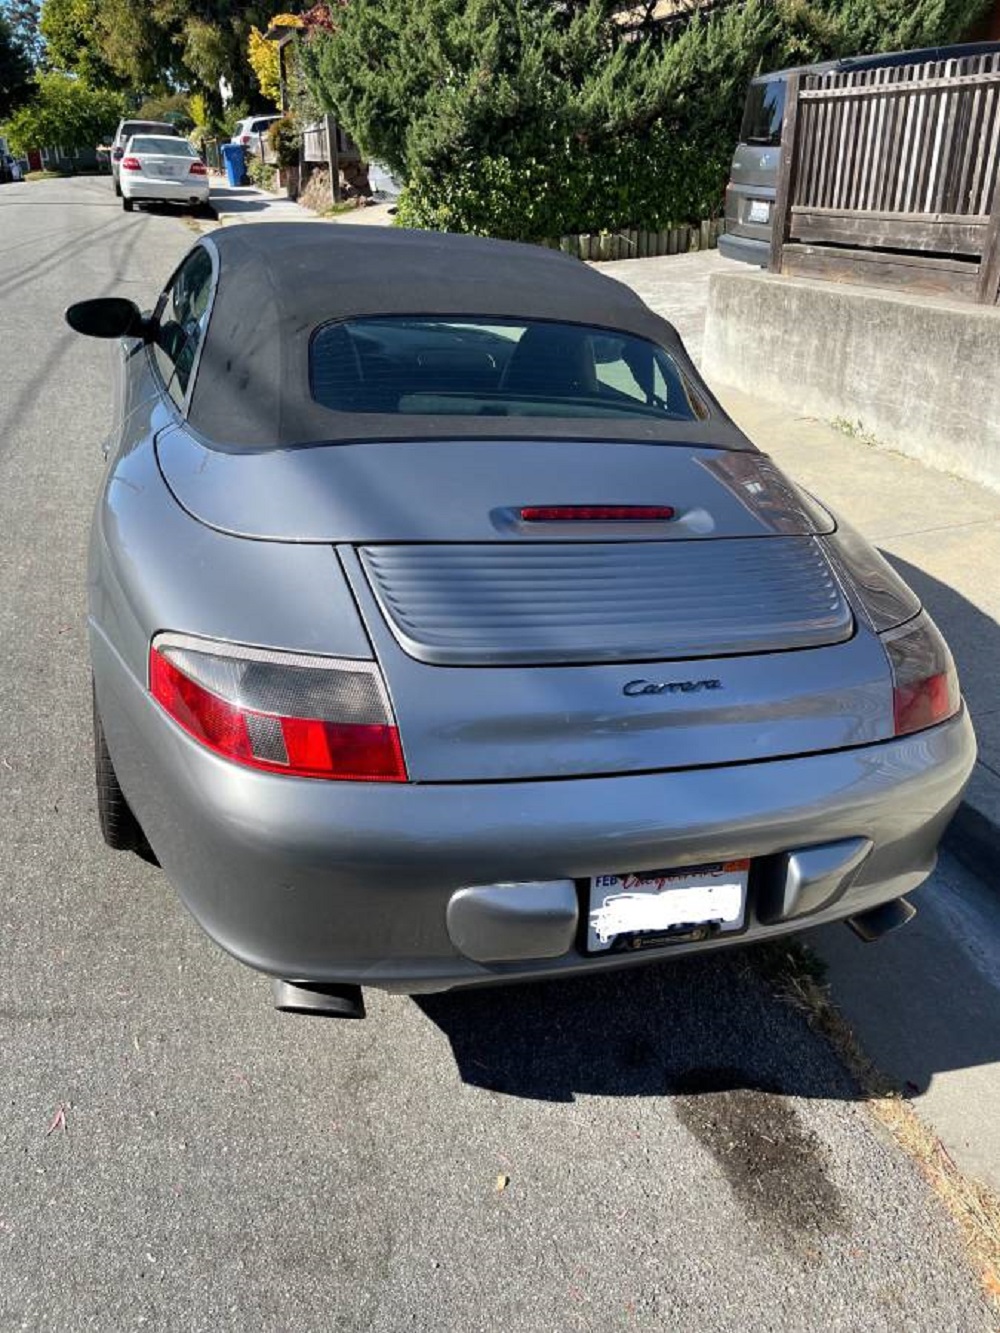 Is this 2003 911 Carrera 4 Cabriolet a Good Buy at $23,500?